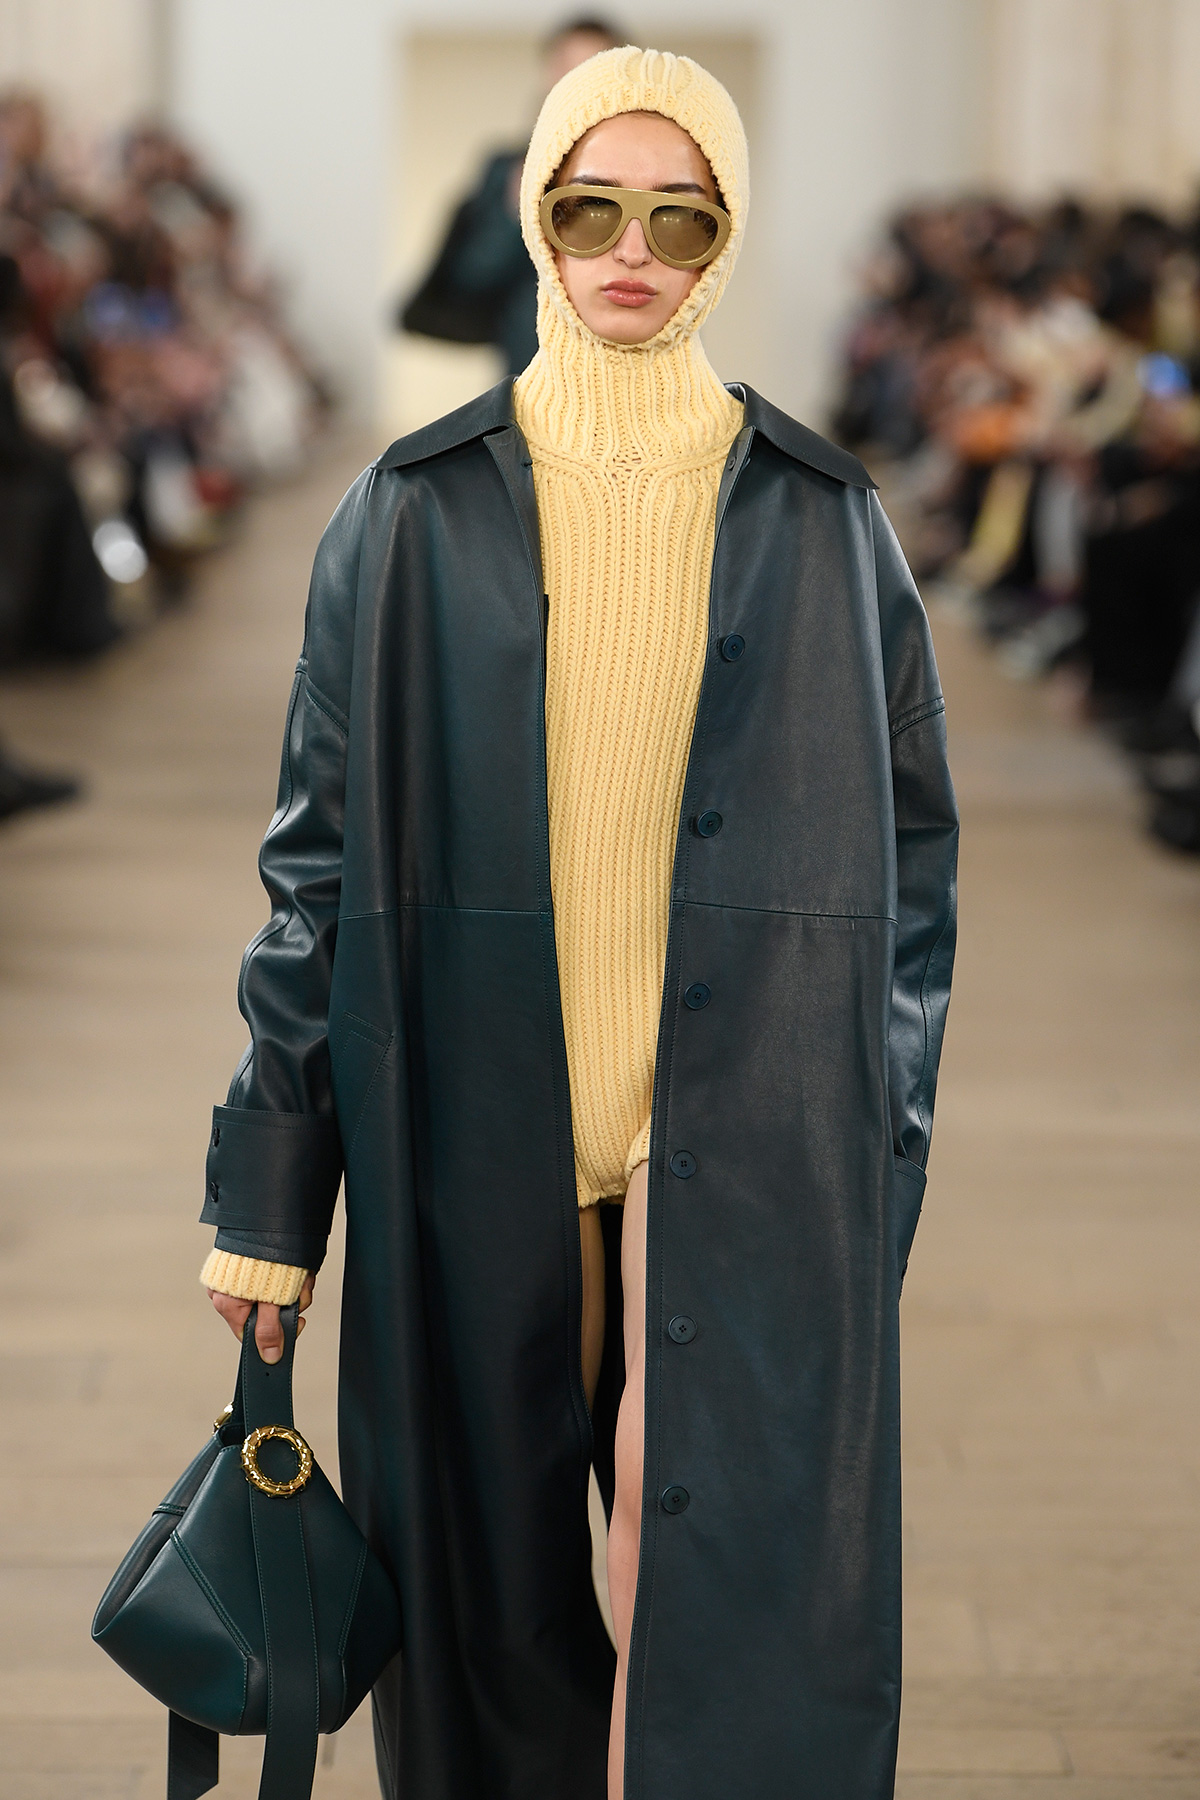 Model walks on the runway at Lanvin Fall 2023 Ready To Wear Fashion Show on March 5, 2023 in Paris, France.